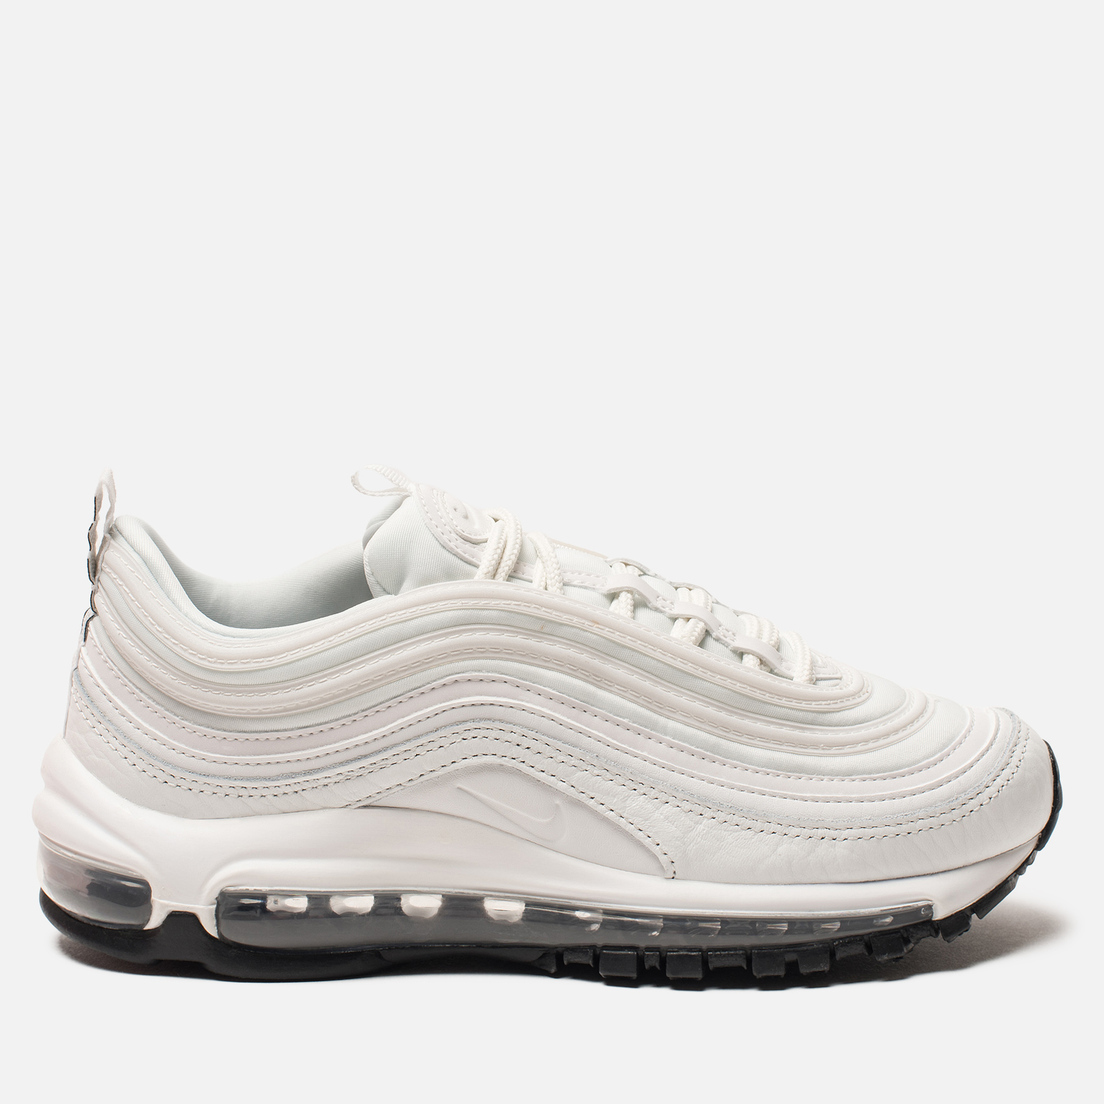 Nike Женские кроссовки Air Max 97 Leather